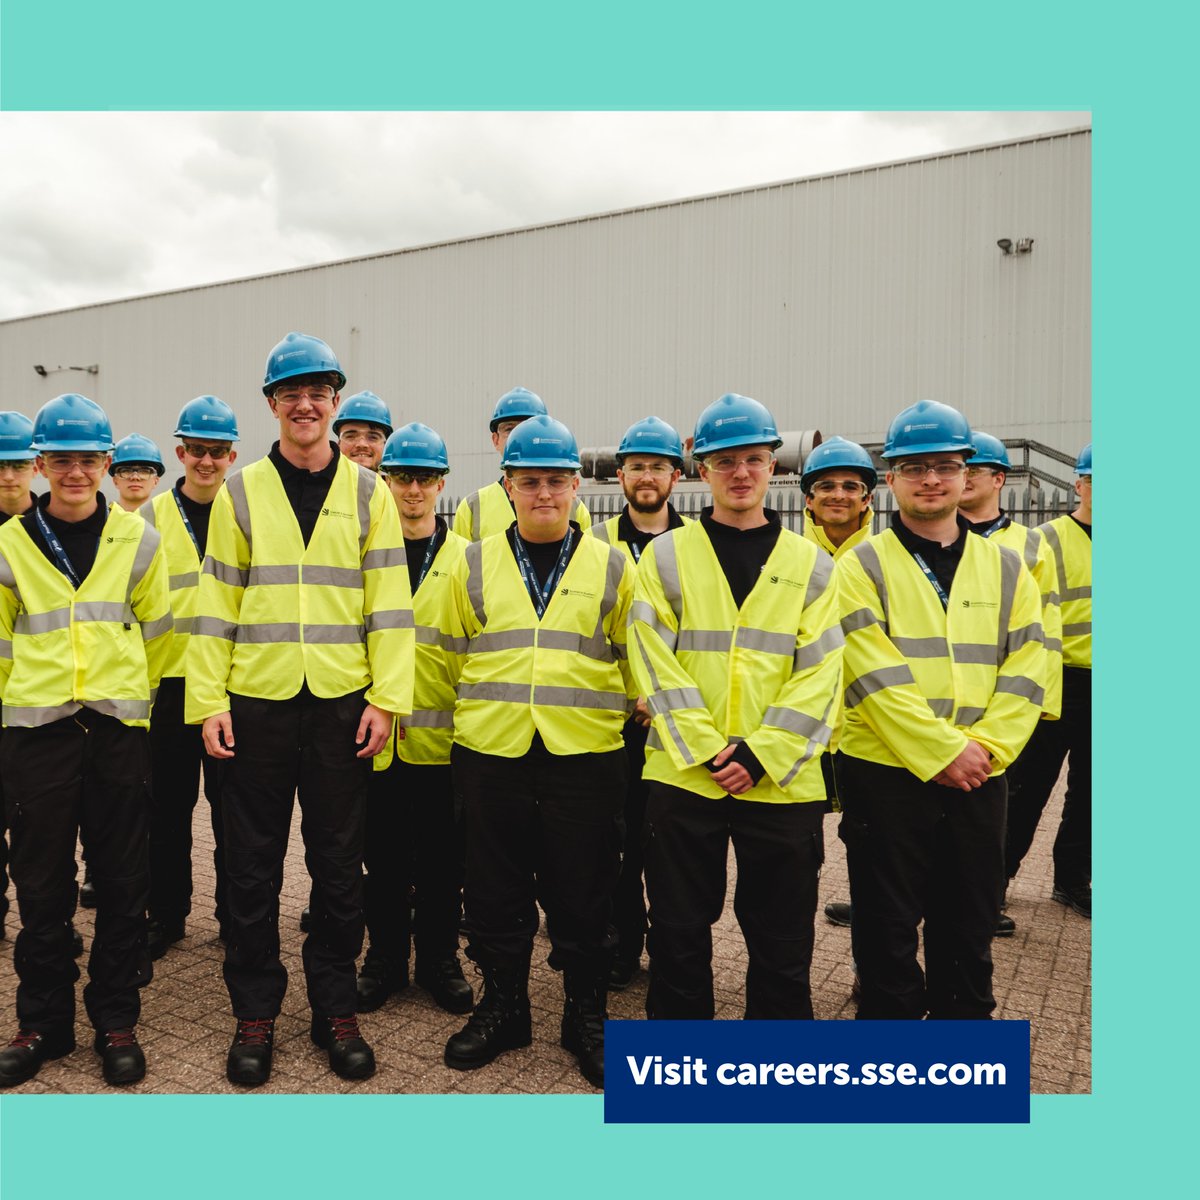 Do you want a successful career but don't like the idea of studying at college or uni full time? 👩‍🏫📚Do you want to work towards a qualification while learning on the job and getting paid? 👷🏽⚒️ Check out our available roles here careers.sse.com/apprenticeships #apprenticeships